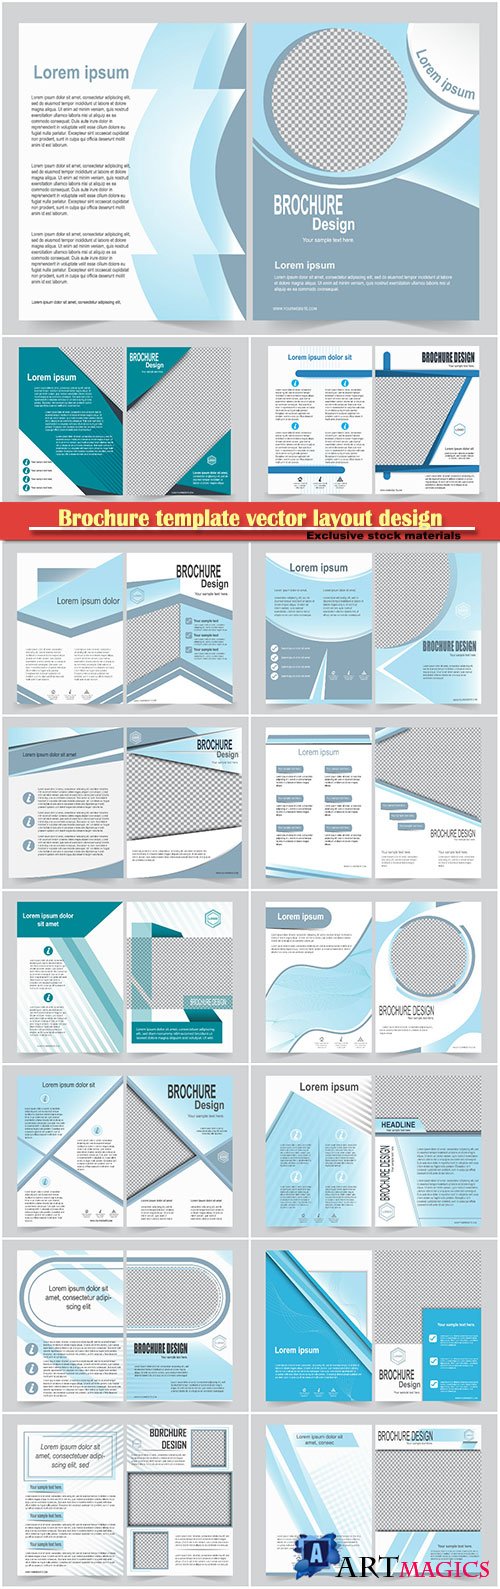 Brochure template vector layout design, corporate business annual report, magazine, flyer mockup # 153